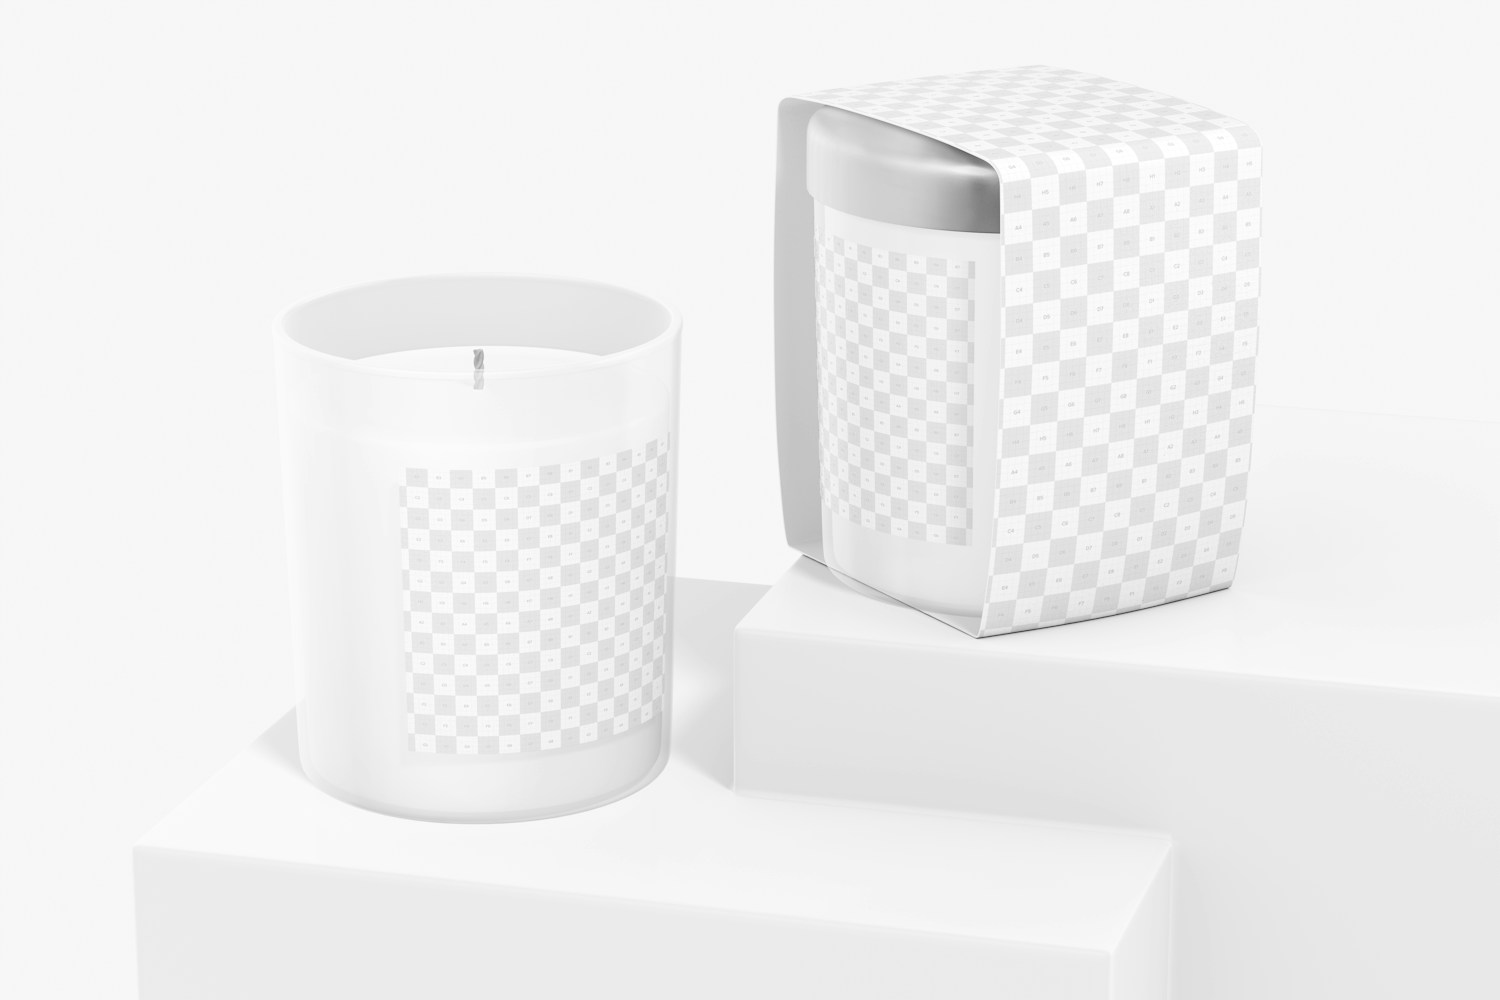 Glass Candle Jars with Label Mockup, on Surfaces